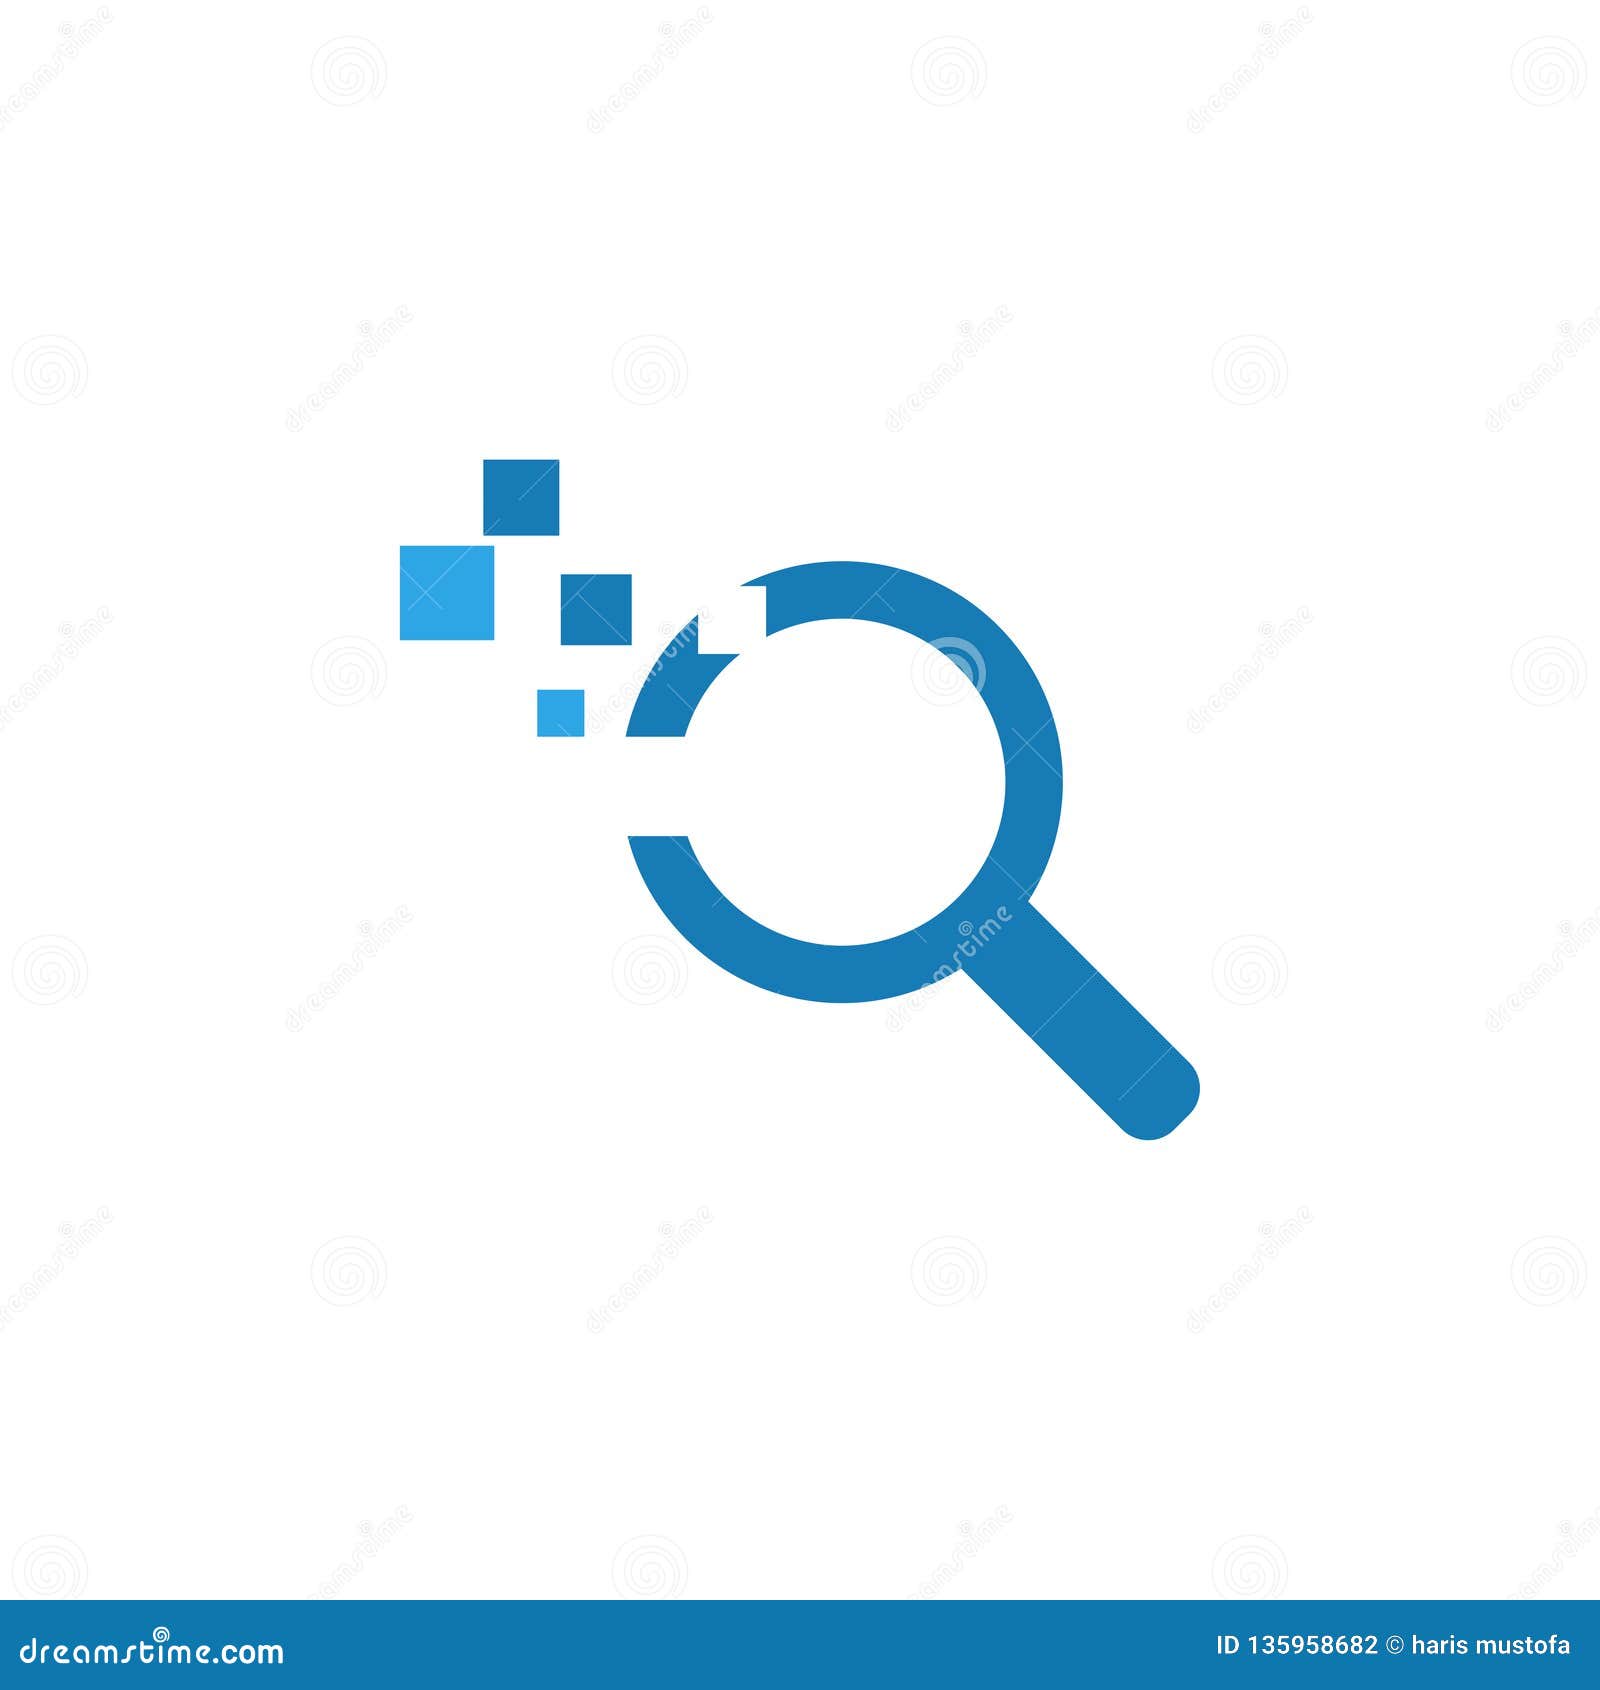 Magnifying glass icon graphic design template Vector Image